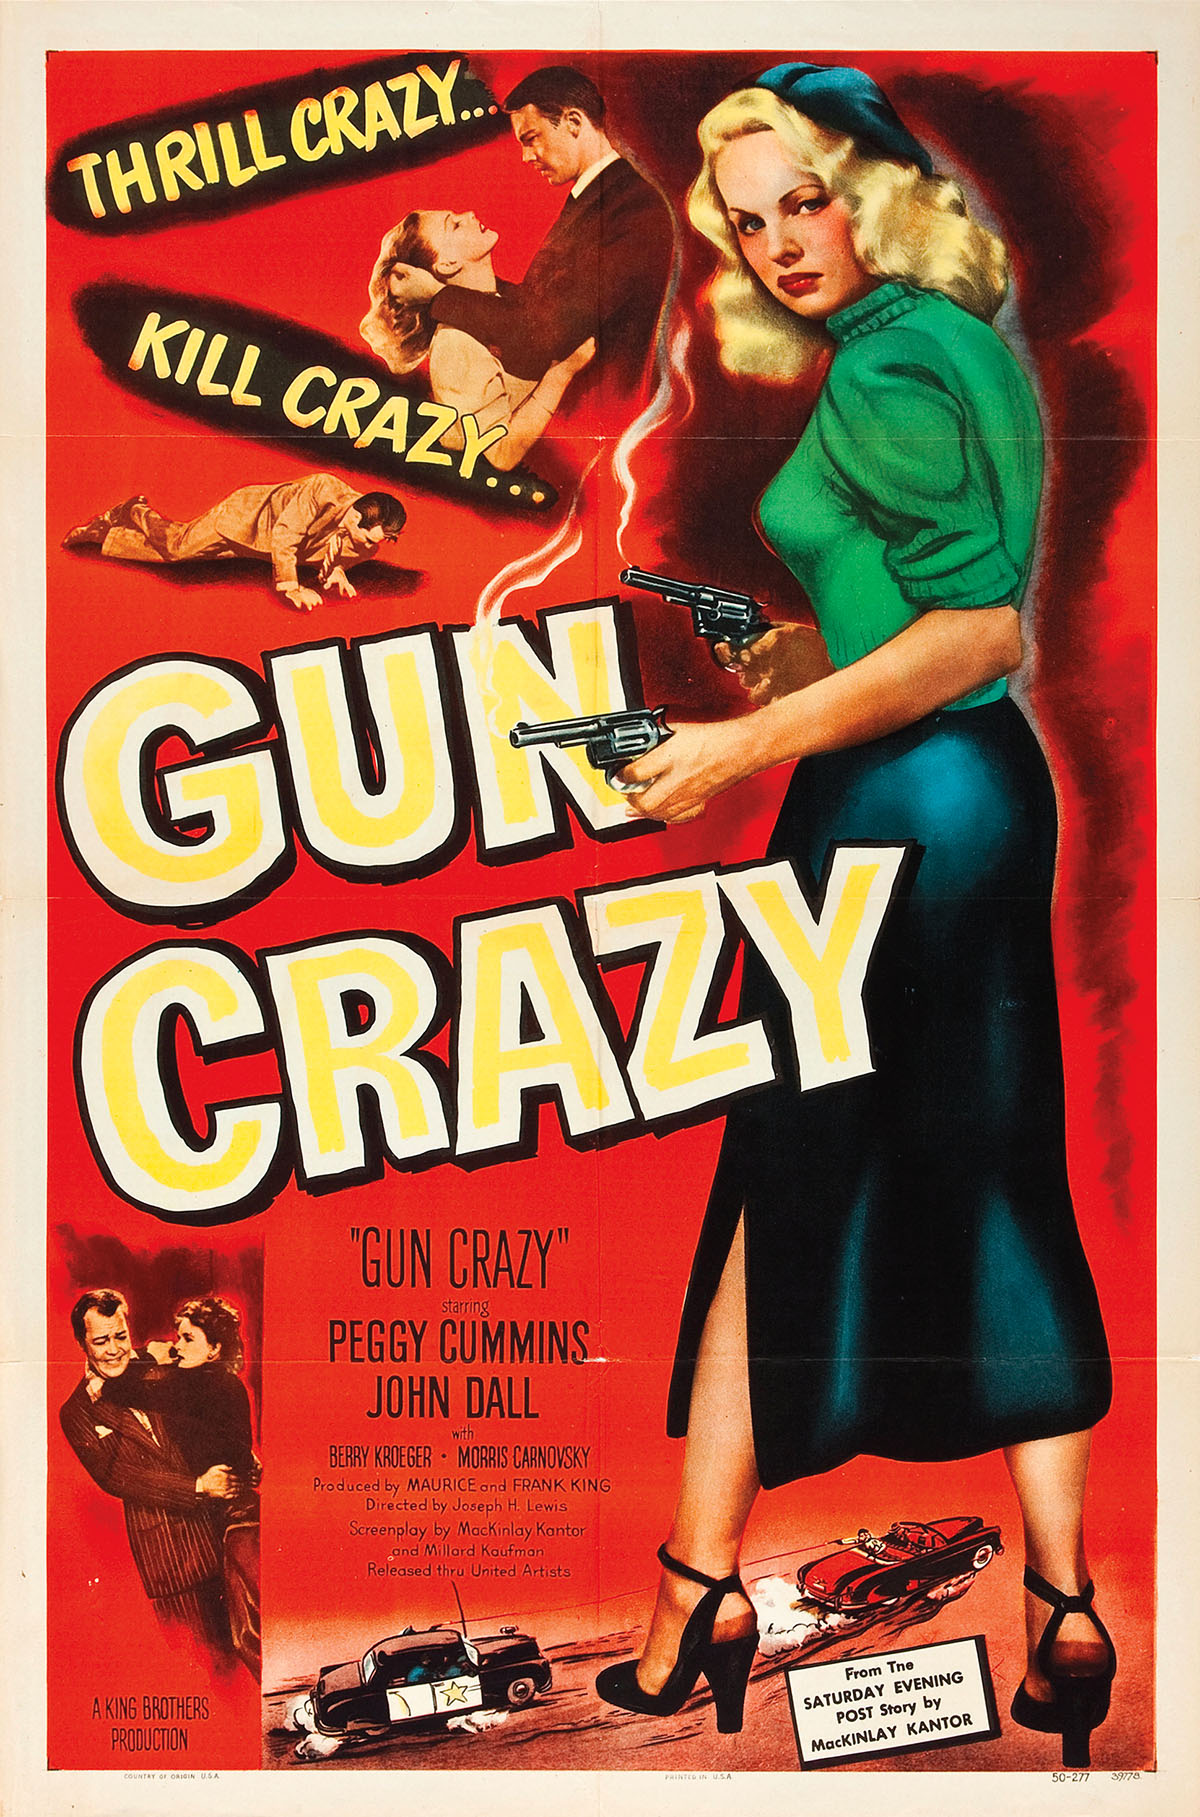 The movie poster for "Gun Crazy"